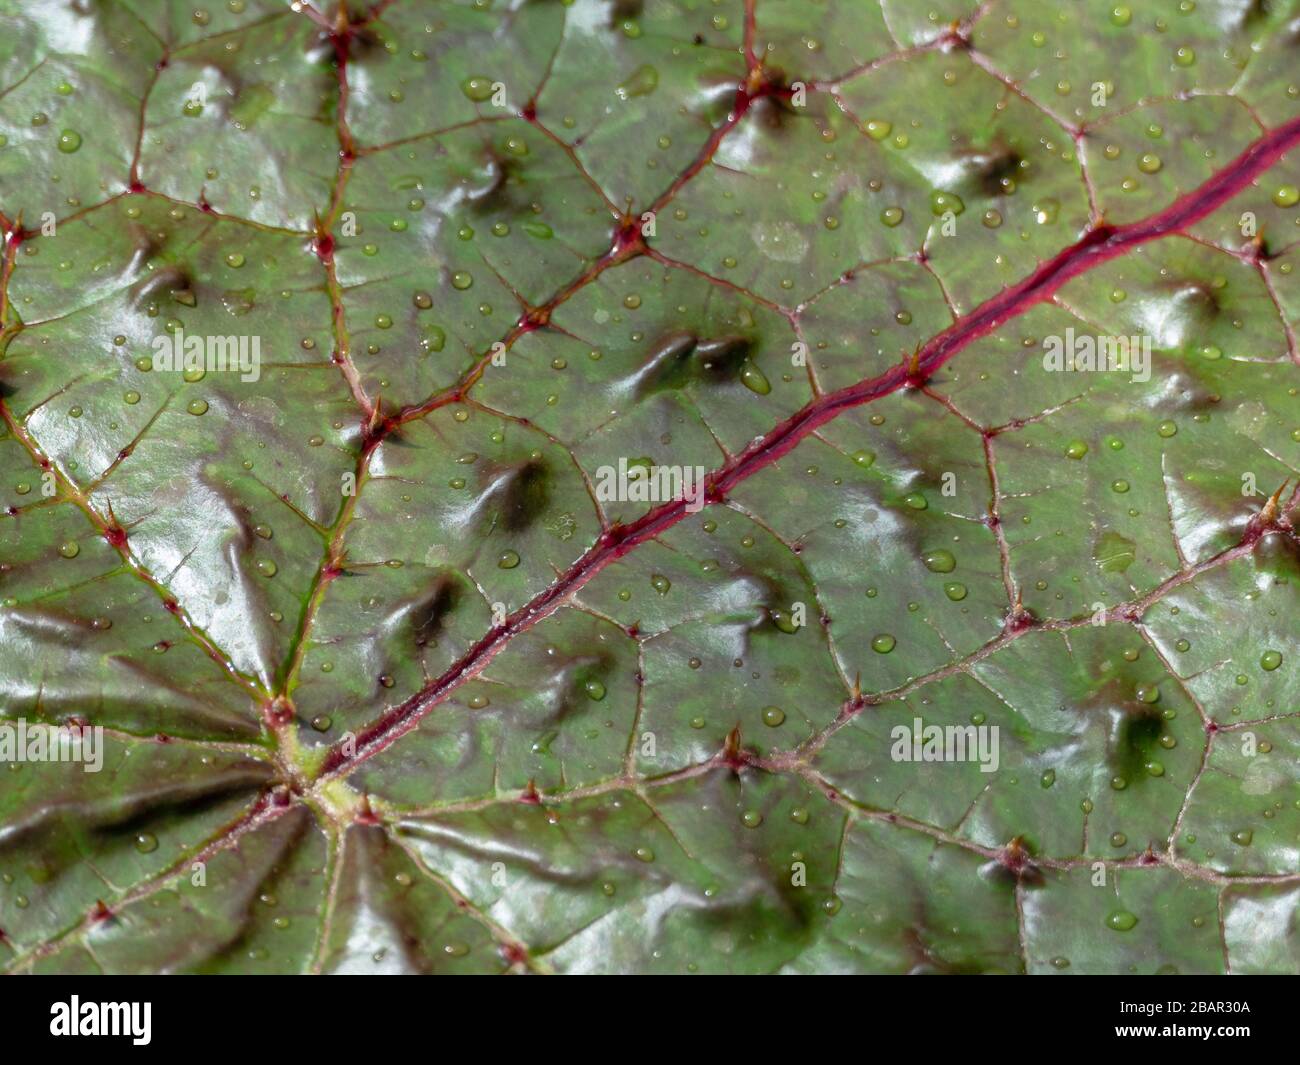 prickly waterlily (Euryale ferox) leaf detail closeup texture Stock Photo